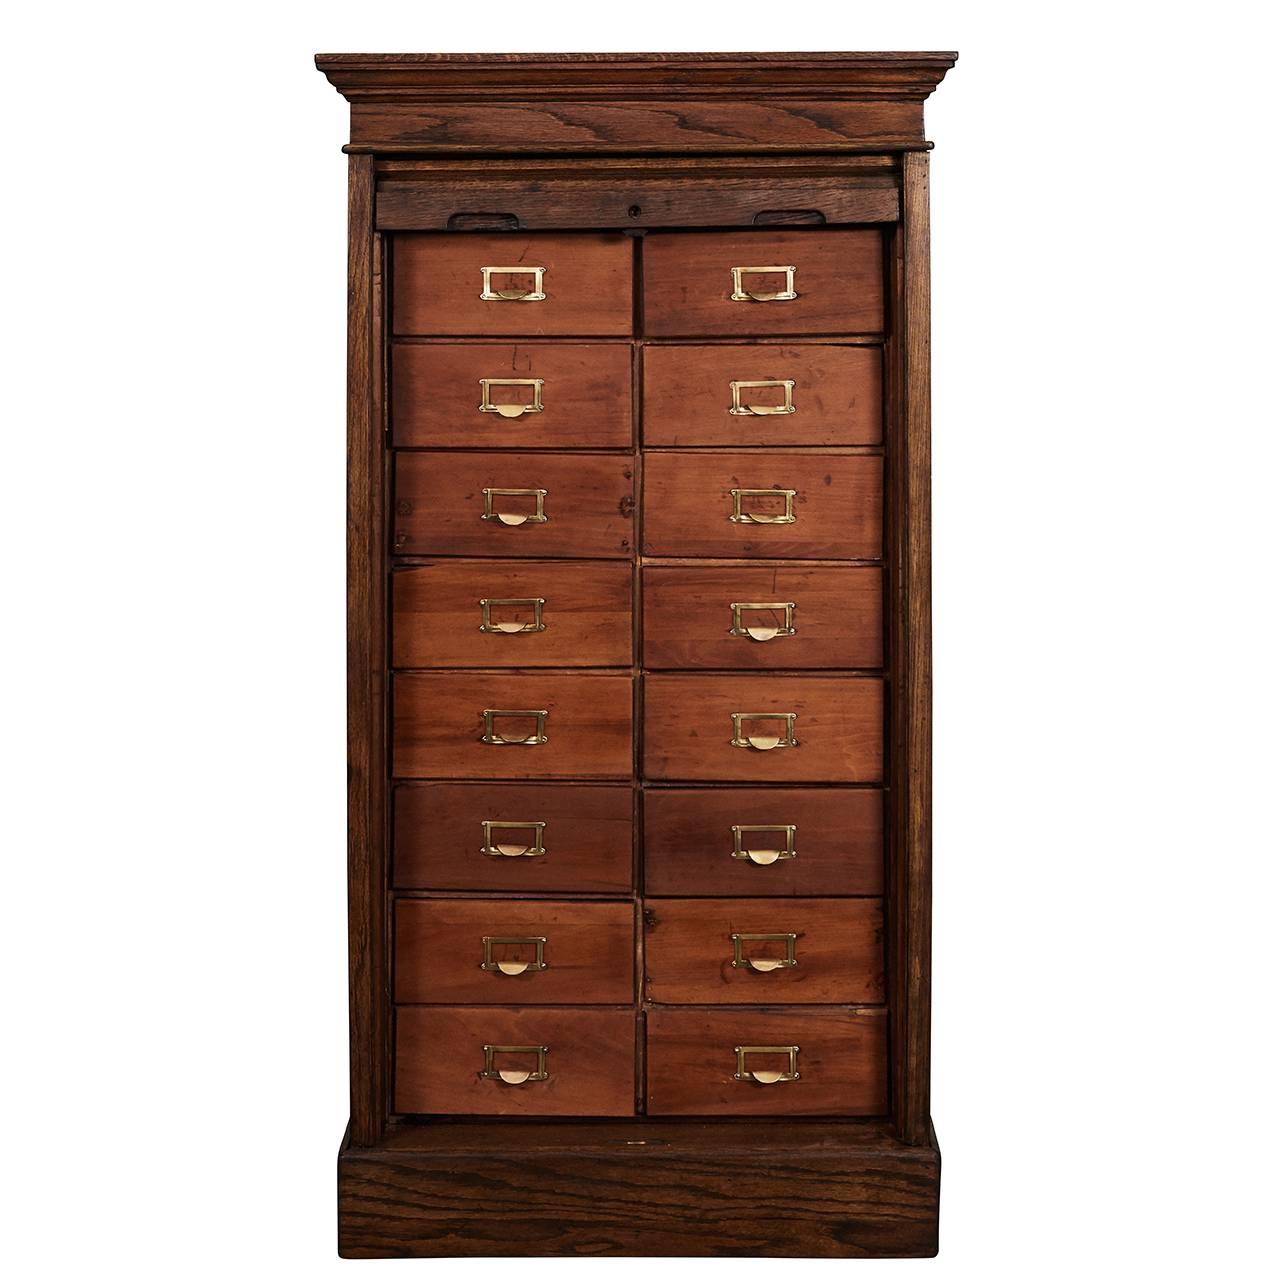 This great roll top filing cabinet has 16 drawers with brass label frames and pull tabs. The oak cabinet is a Classic piece of early 20th century office furniture. There are nicely carved moldings at the top and bottom of the piece.